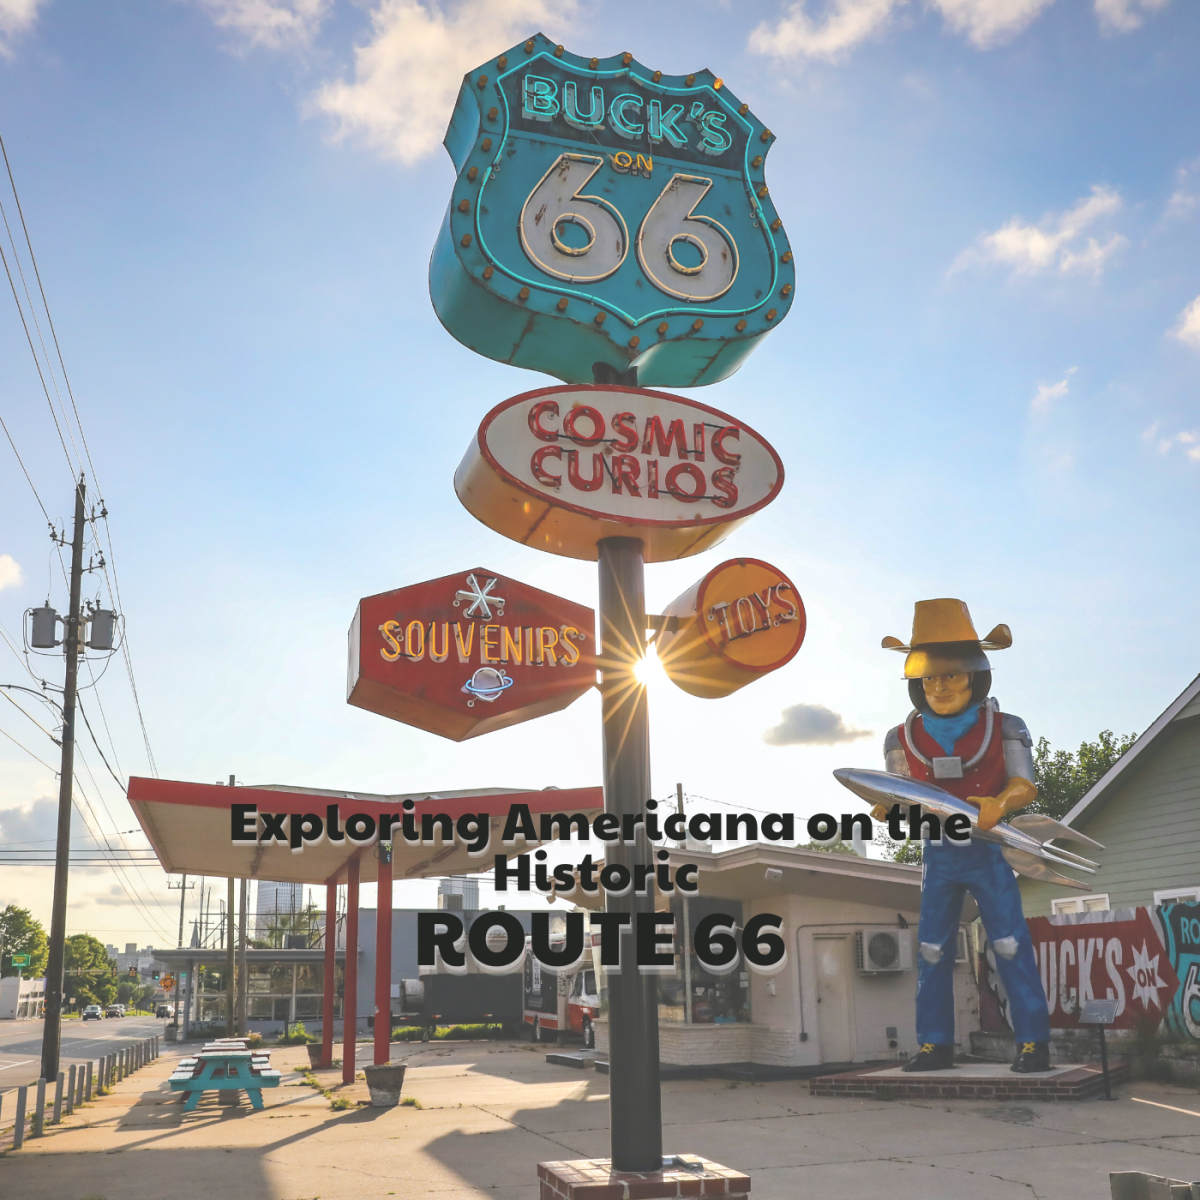 Route 66: Americana Road Trip With Mapping and Travel Tips